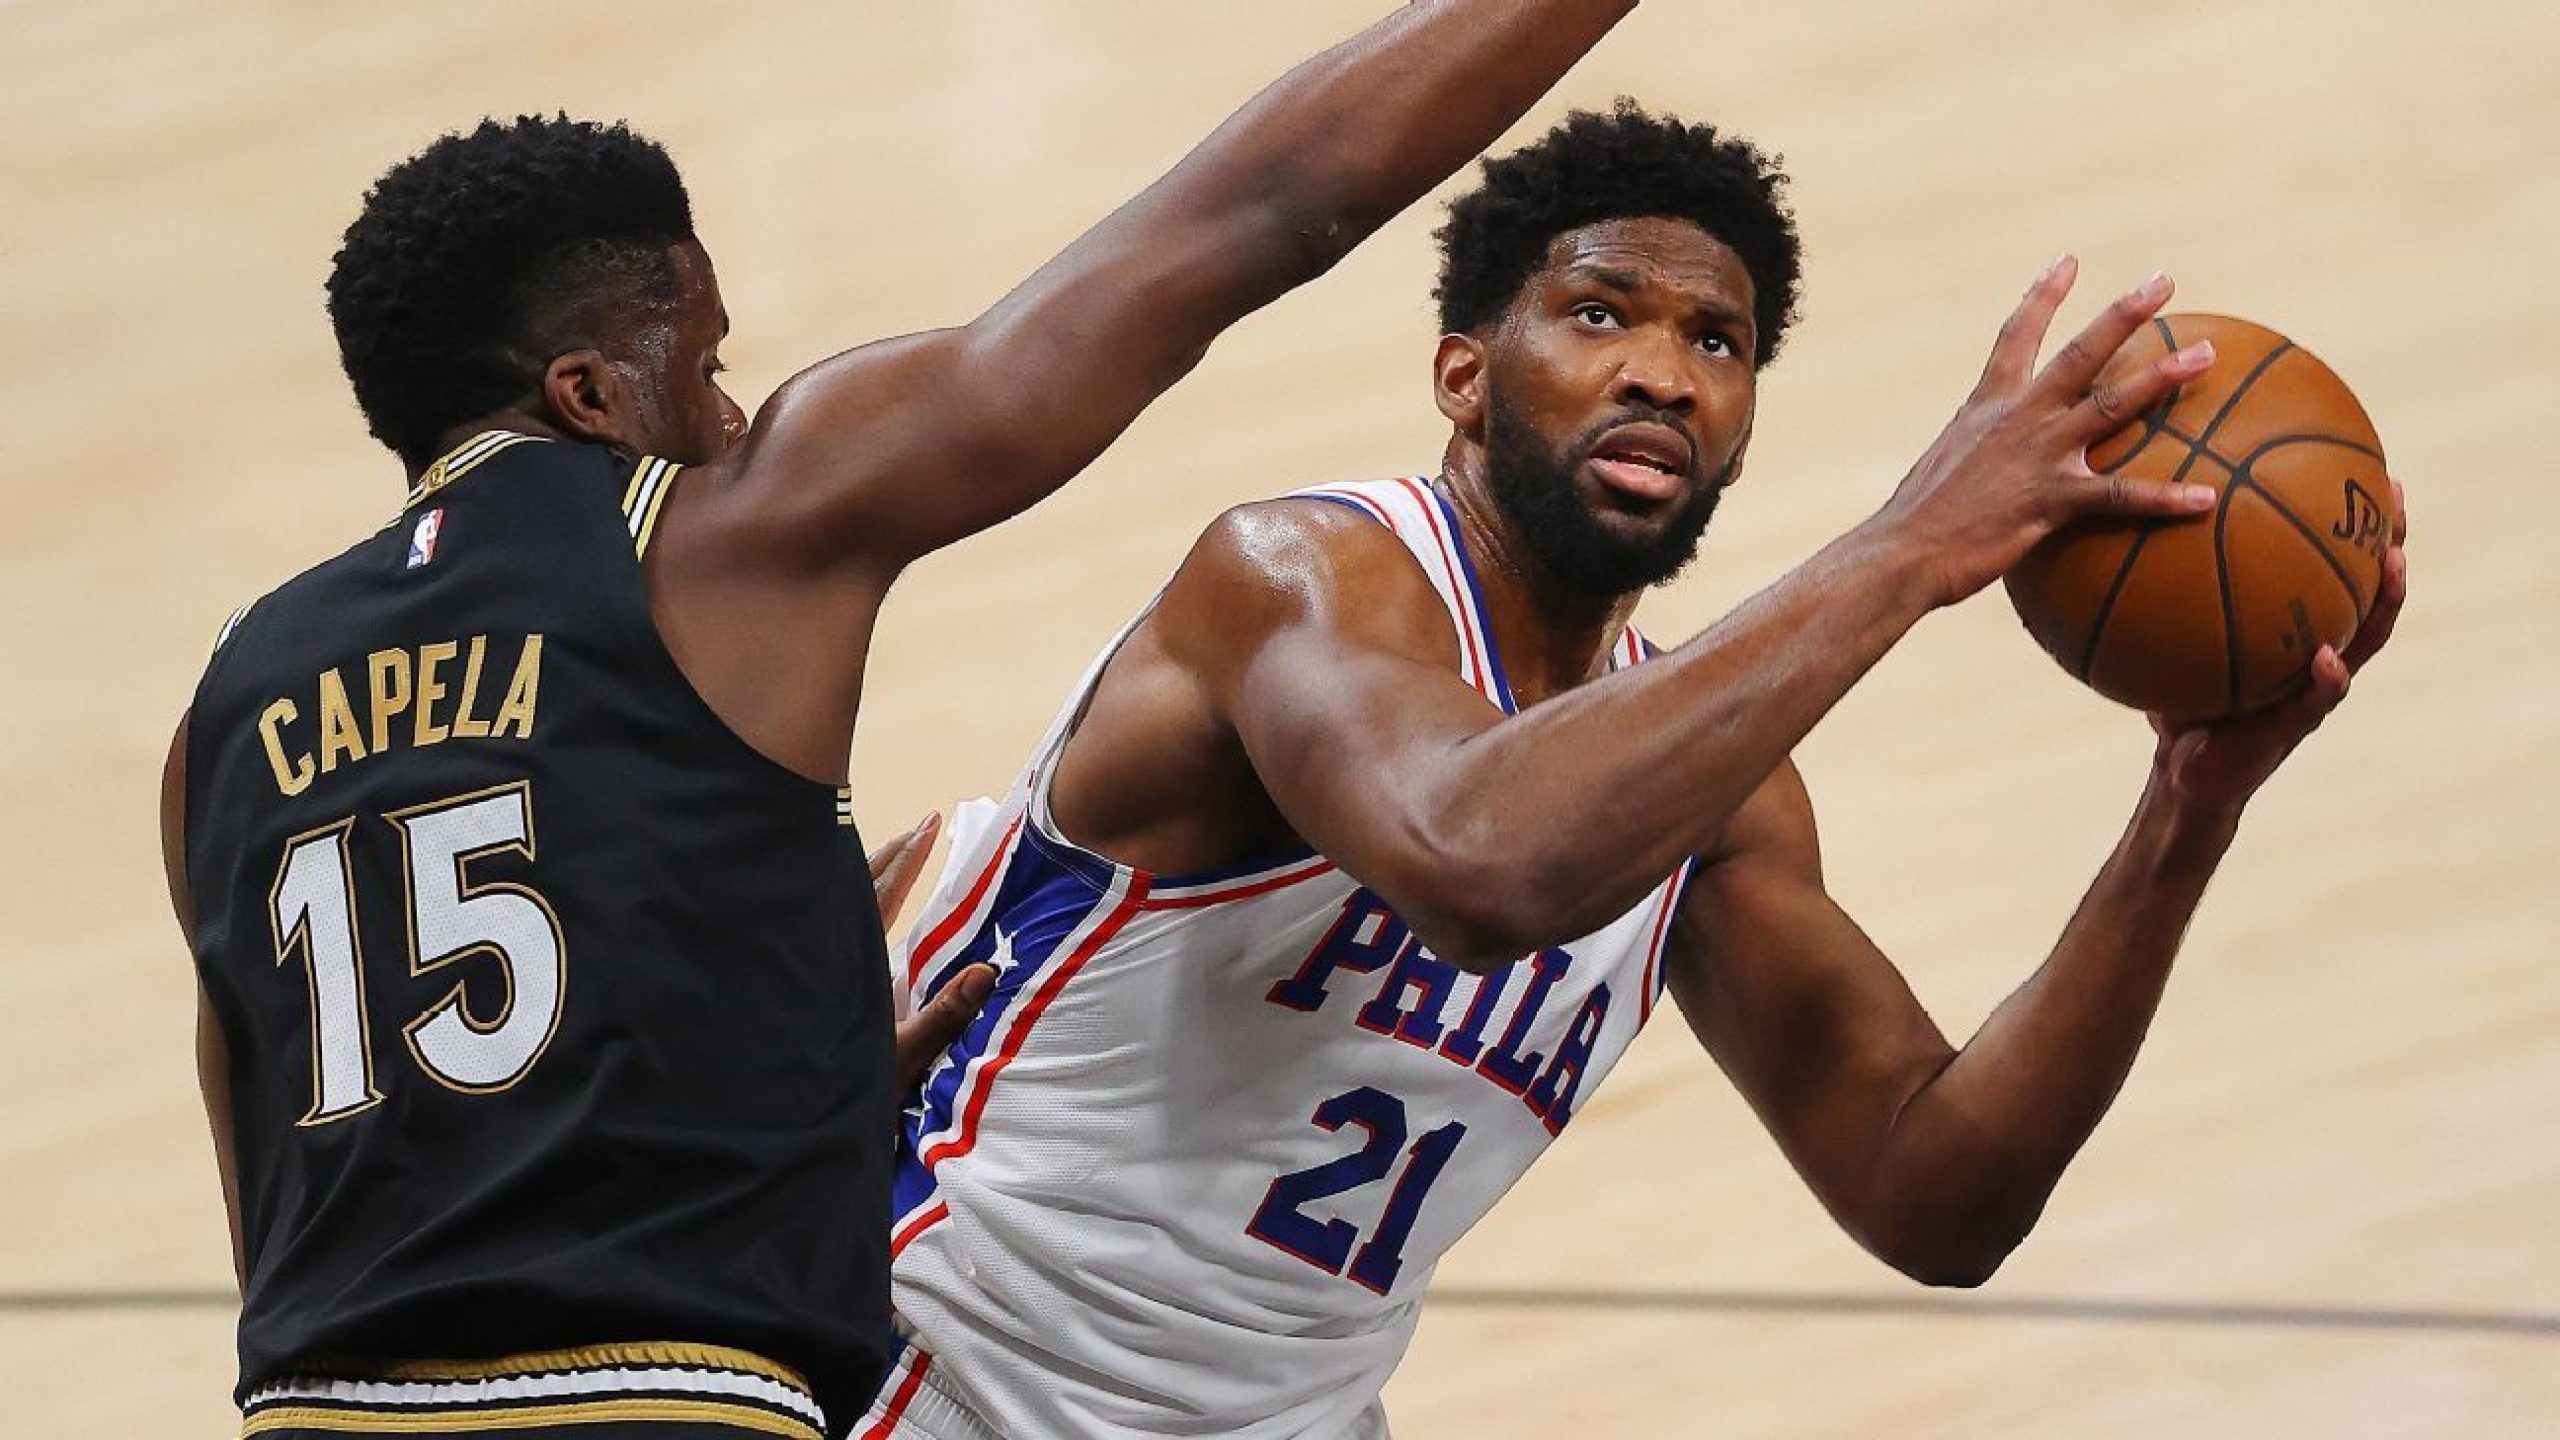 Embiid frustrated with officiating despite win